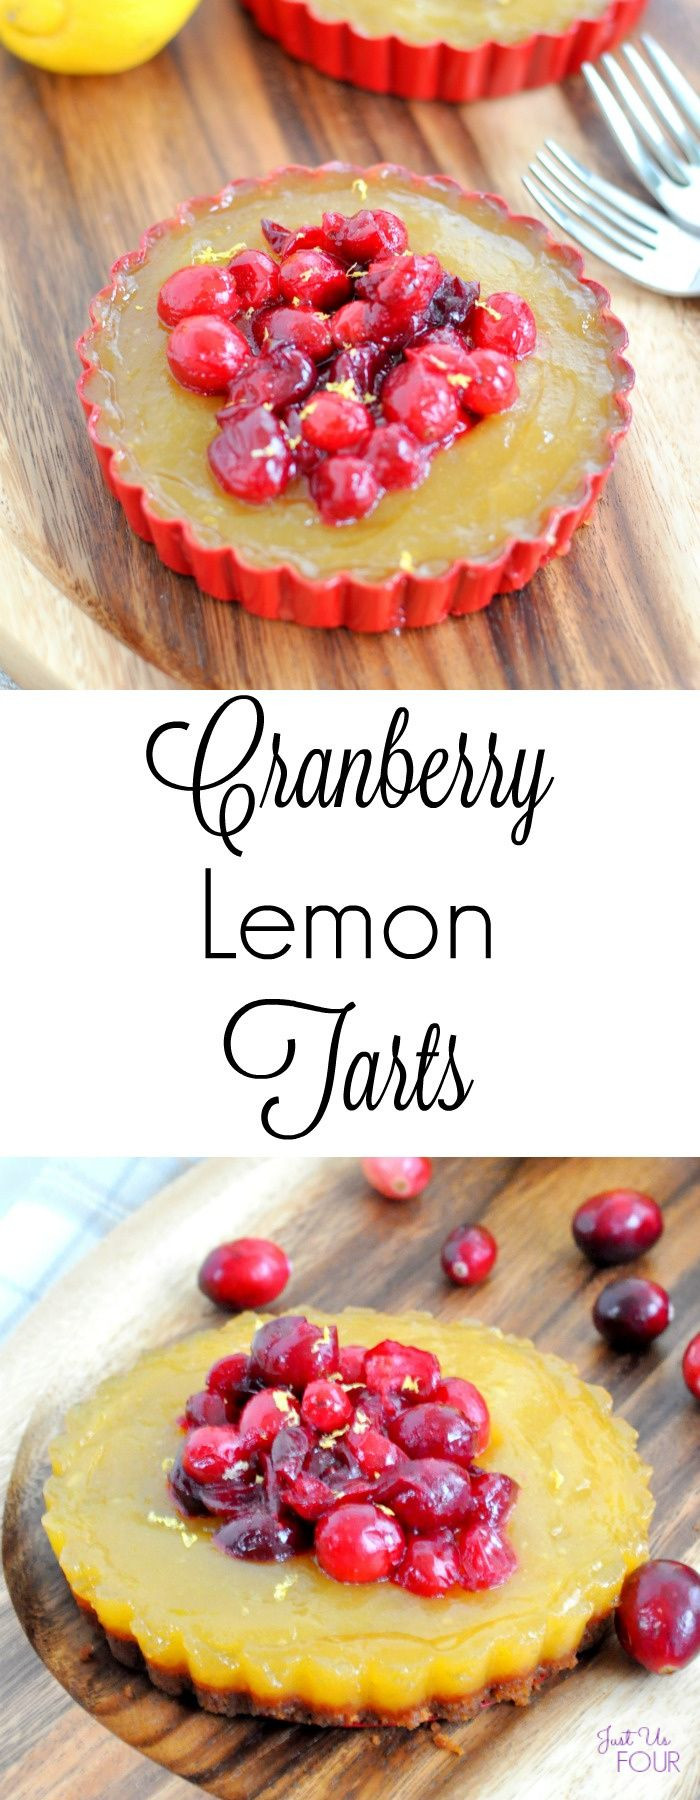 Good Holiday Desserts
 Cranberry Lemon Tarts are a great holiday dessert that can